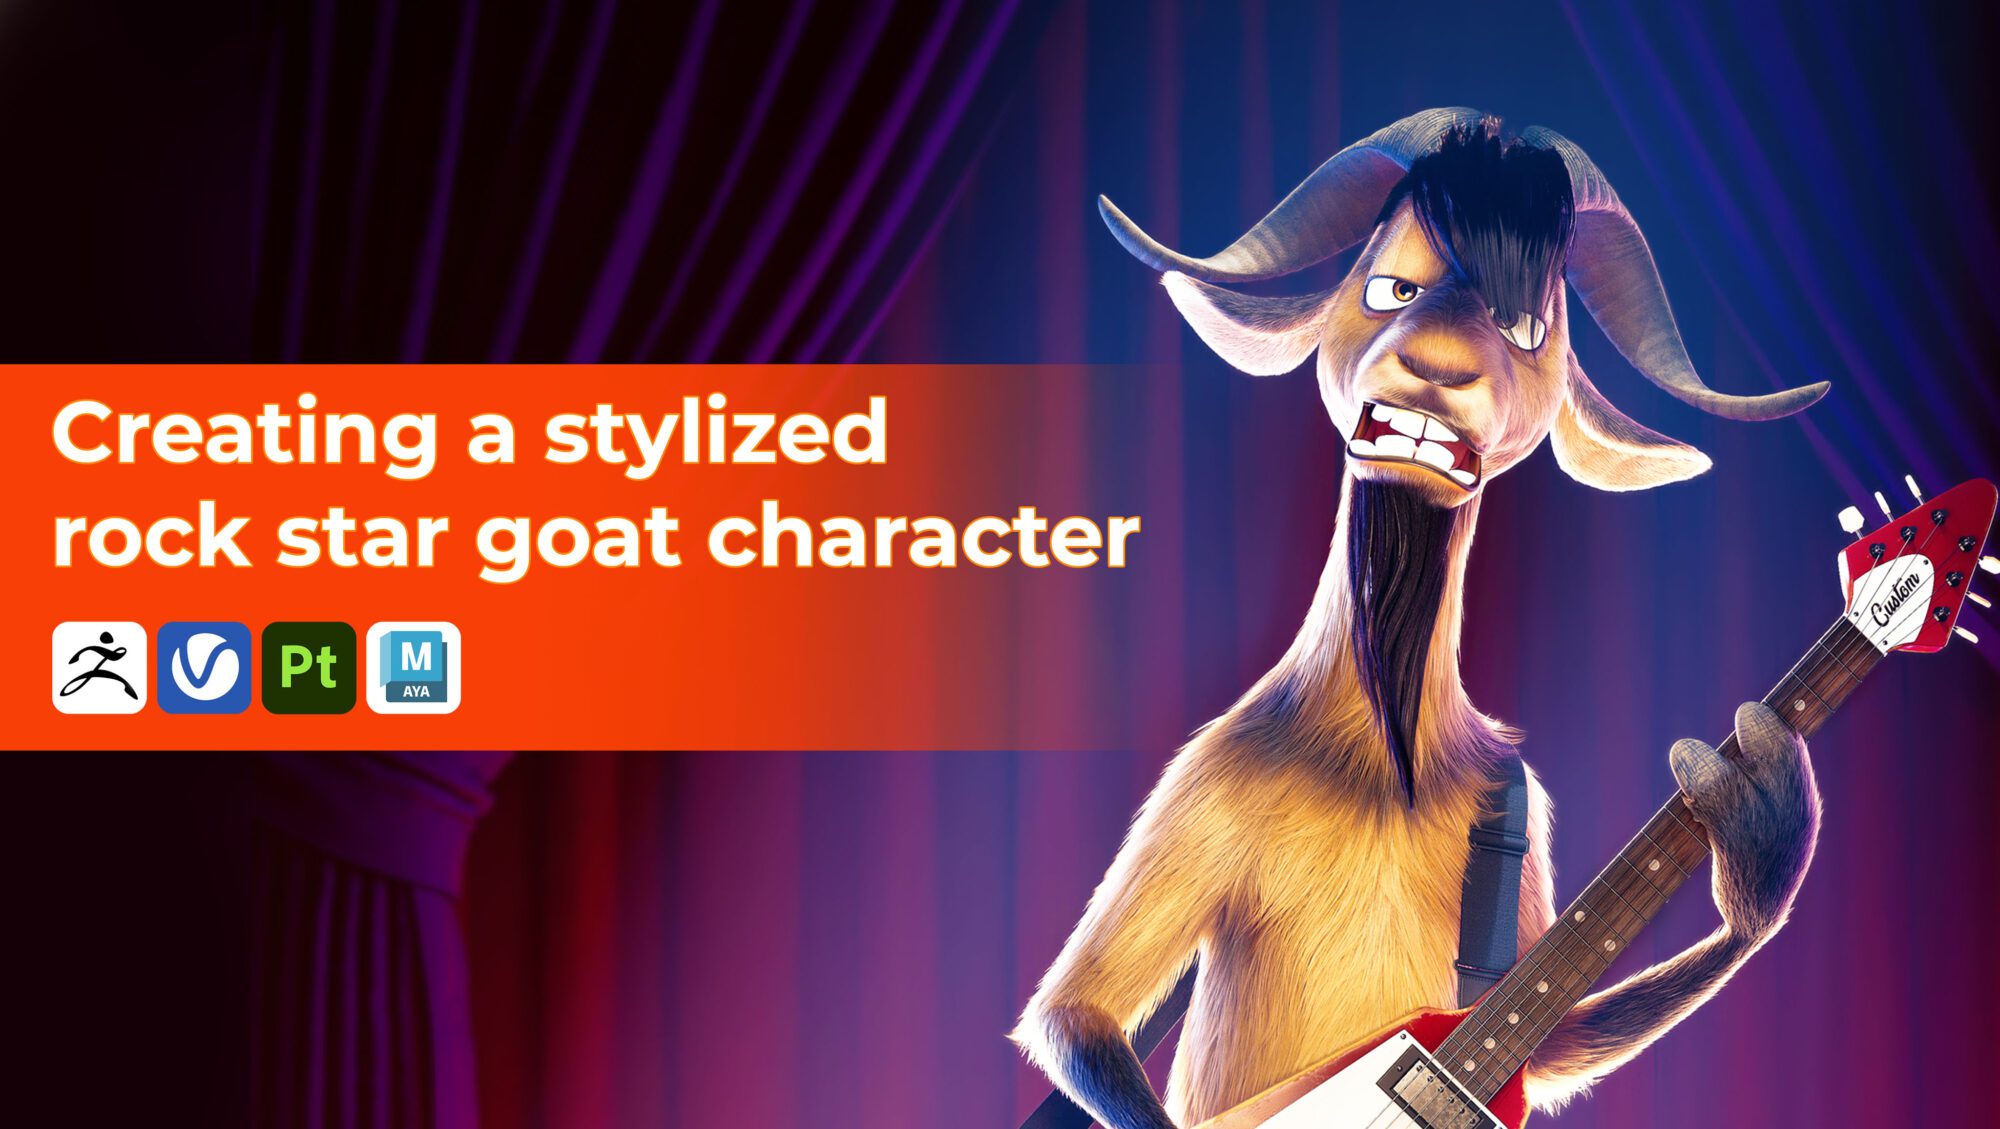 Udemy - Creating a stylized rock star goat character